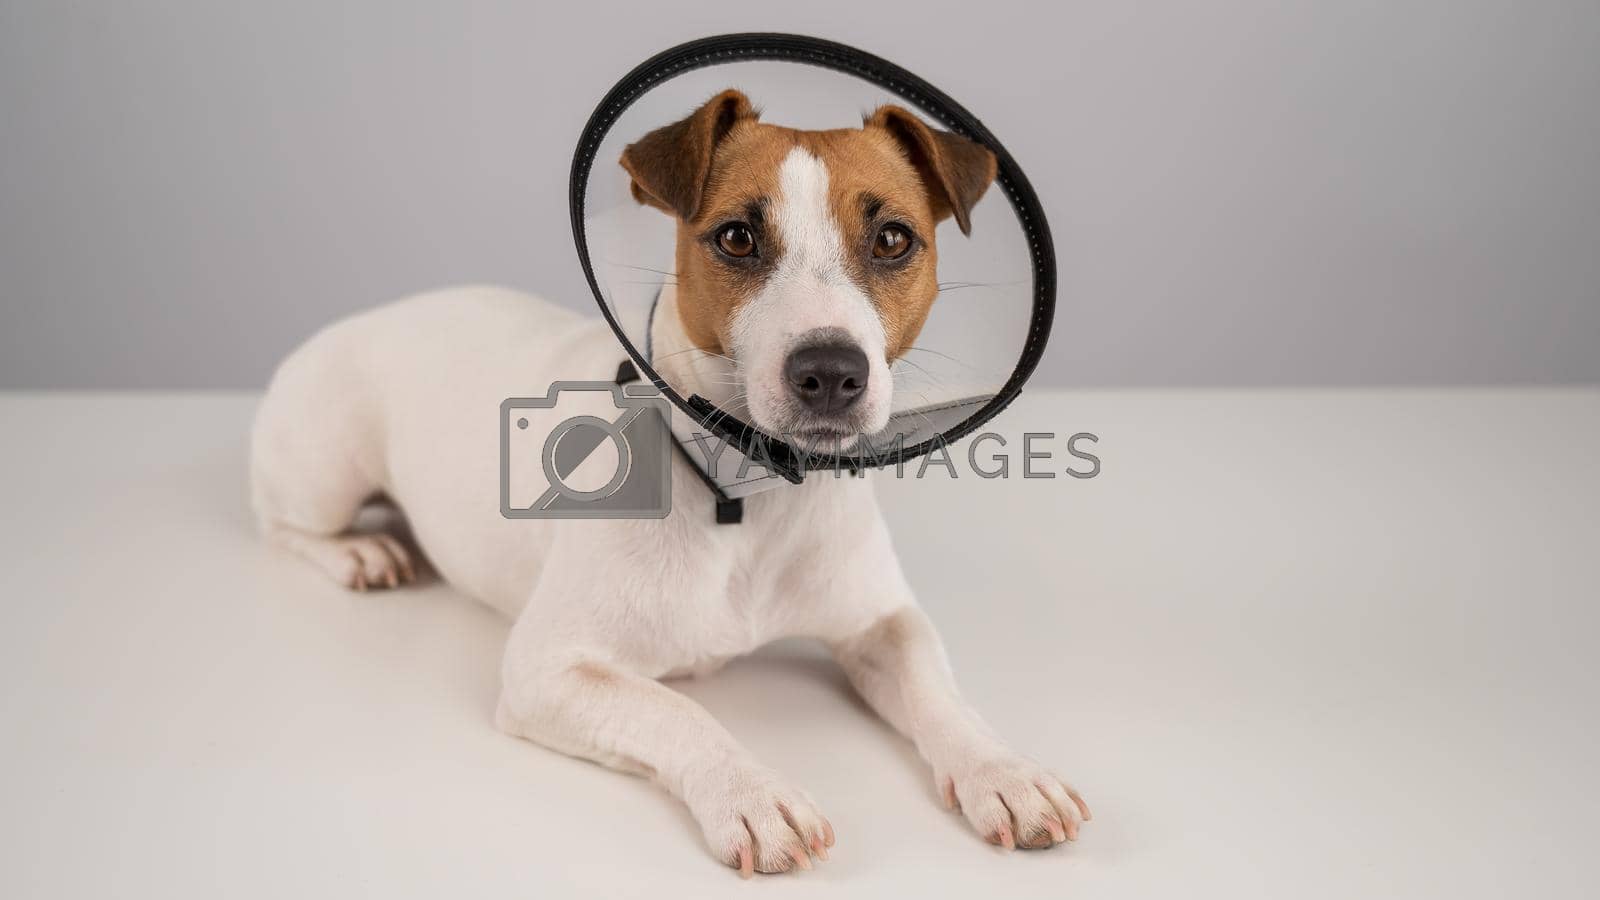 Royalty free image of Jack Russell Terrier dog in plastic cone after surgery. by mrwed54